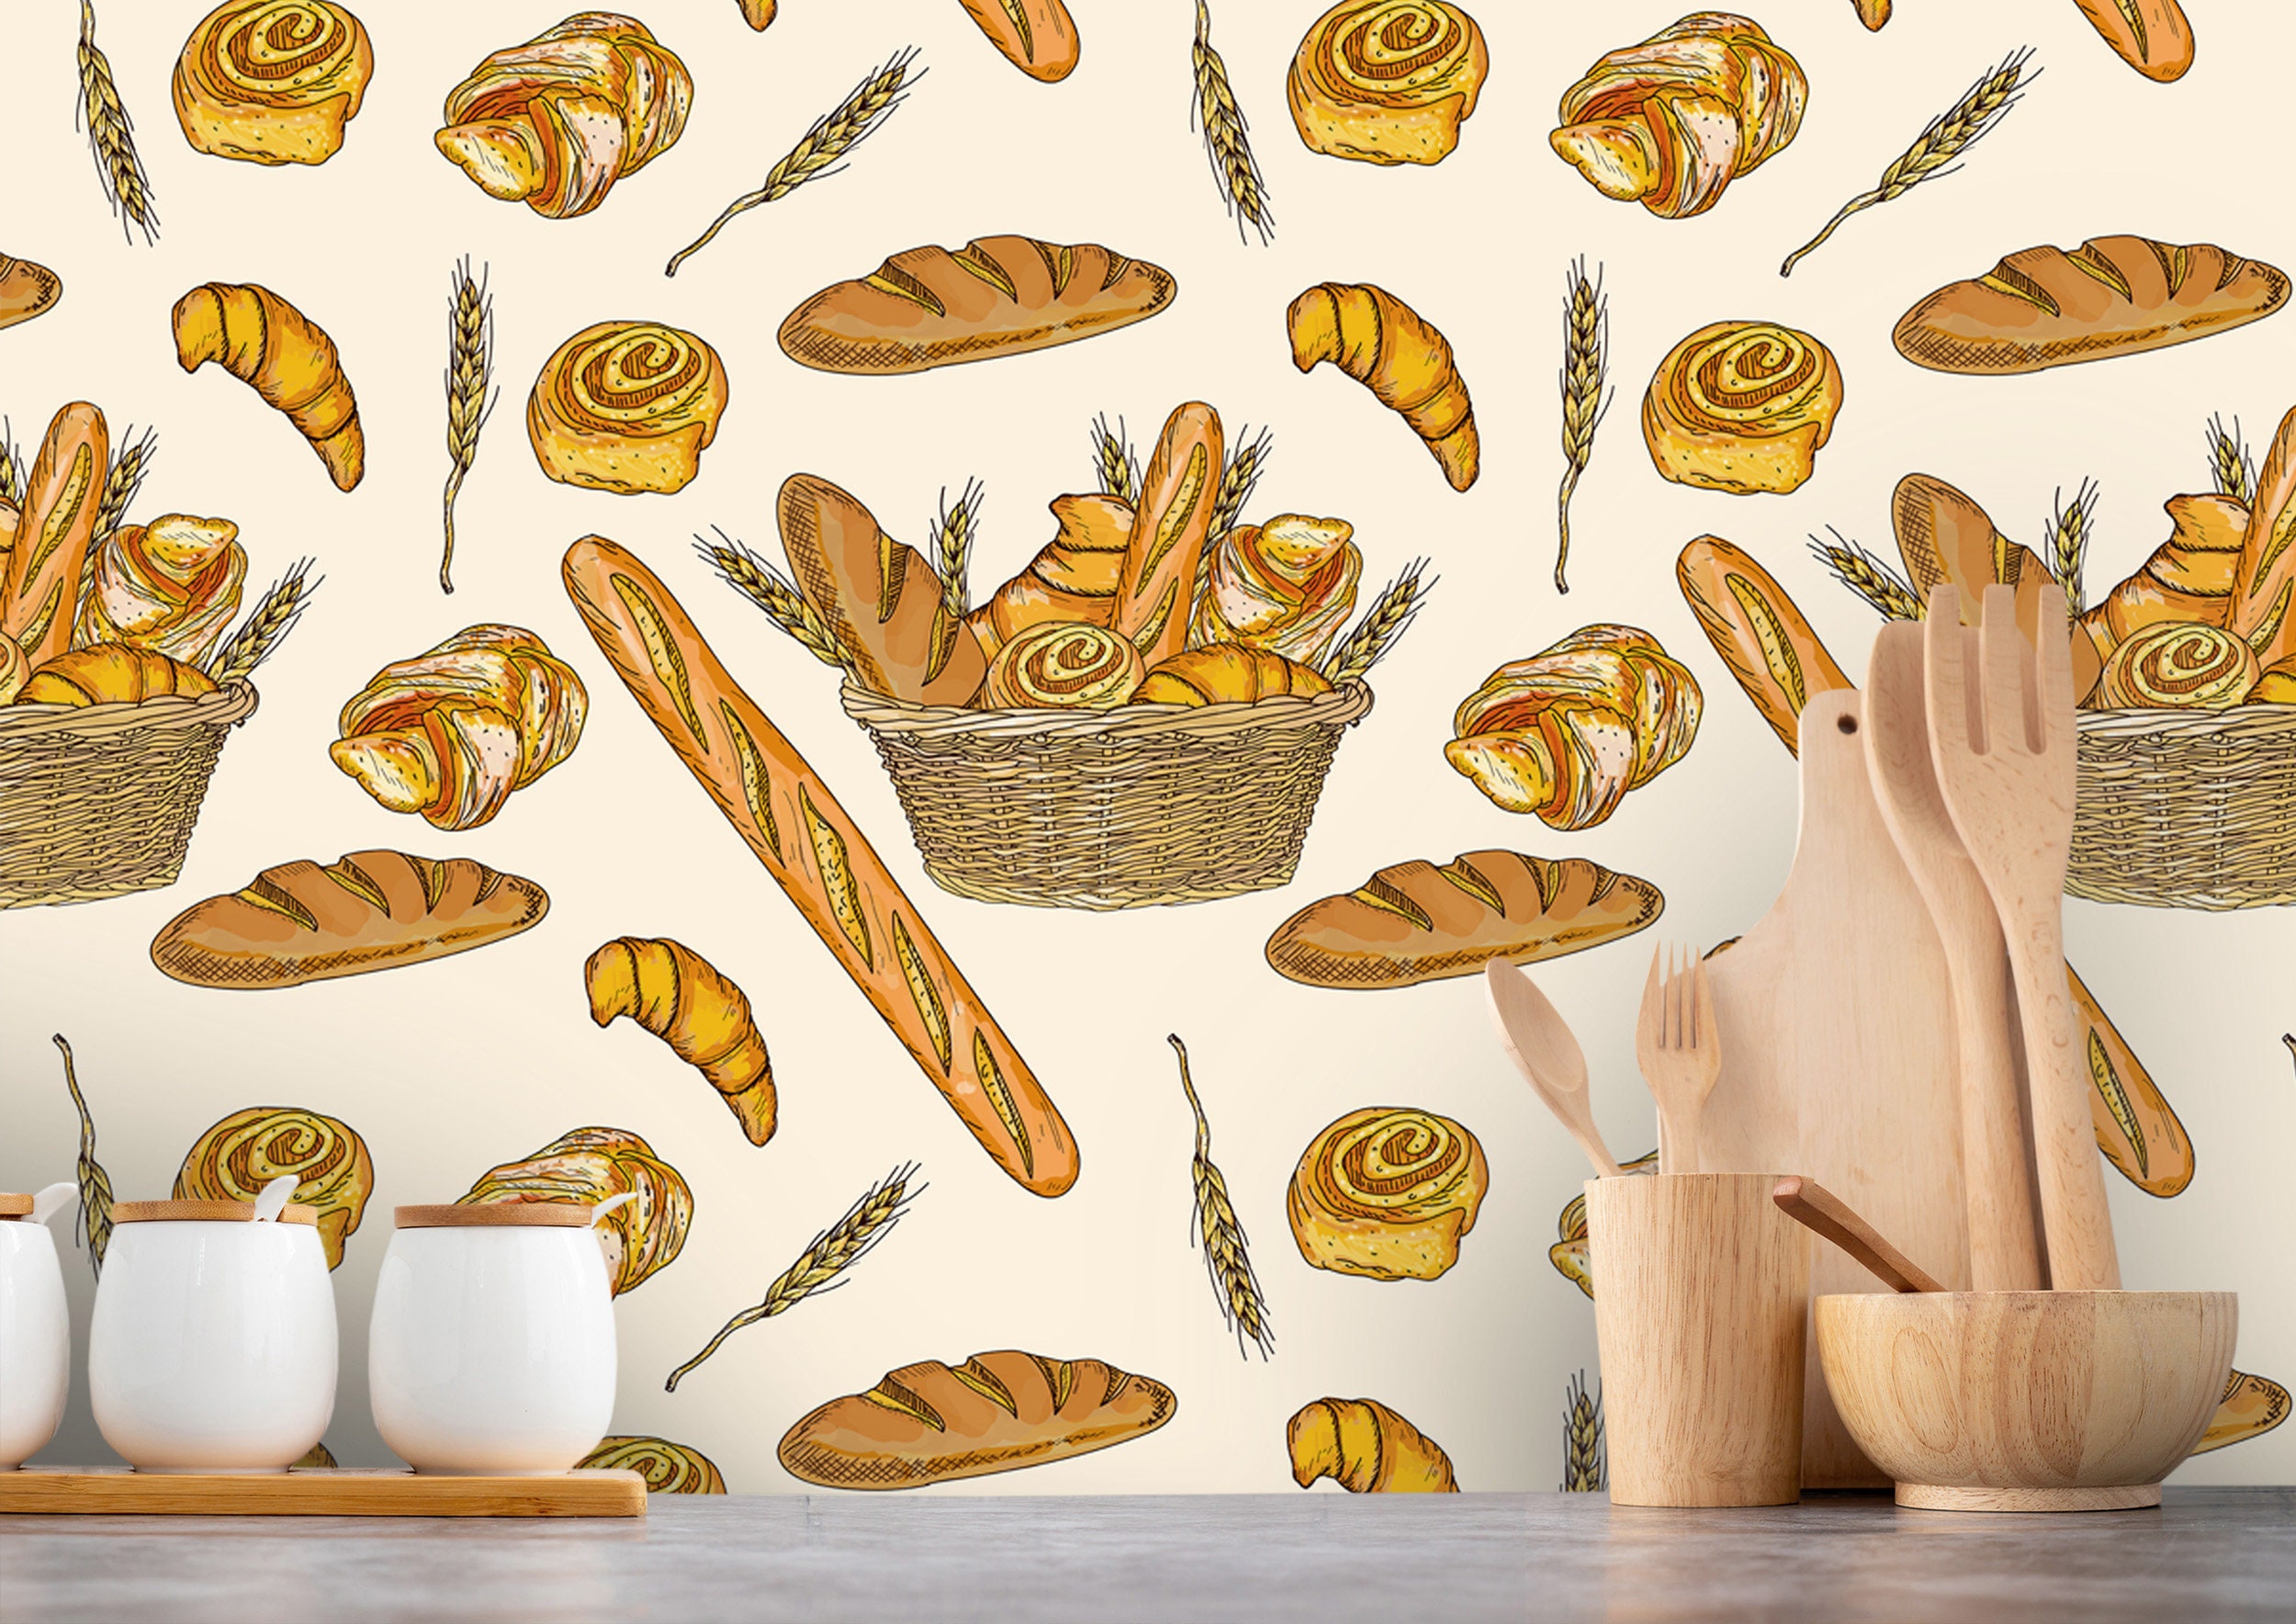 WELCOME TO BAKERY Wall Sticker Vinyl Sticker – Wallpaper for Less Murray